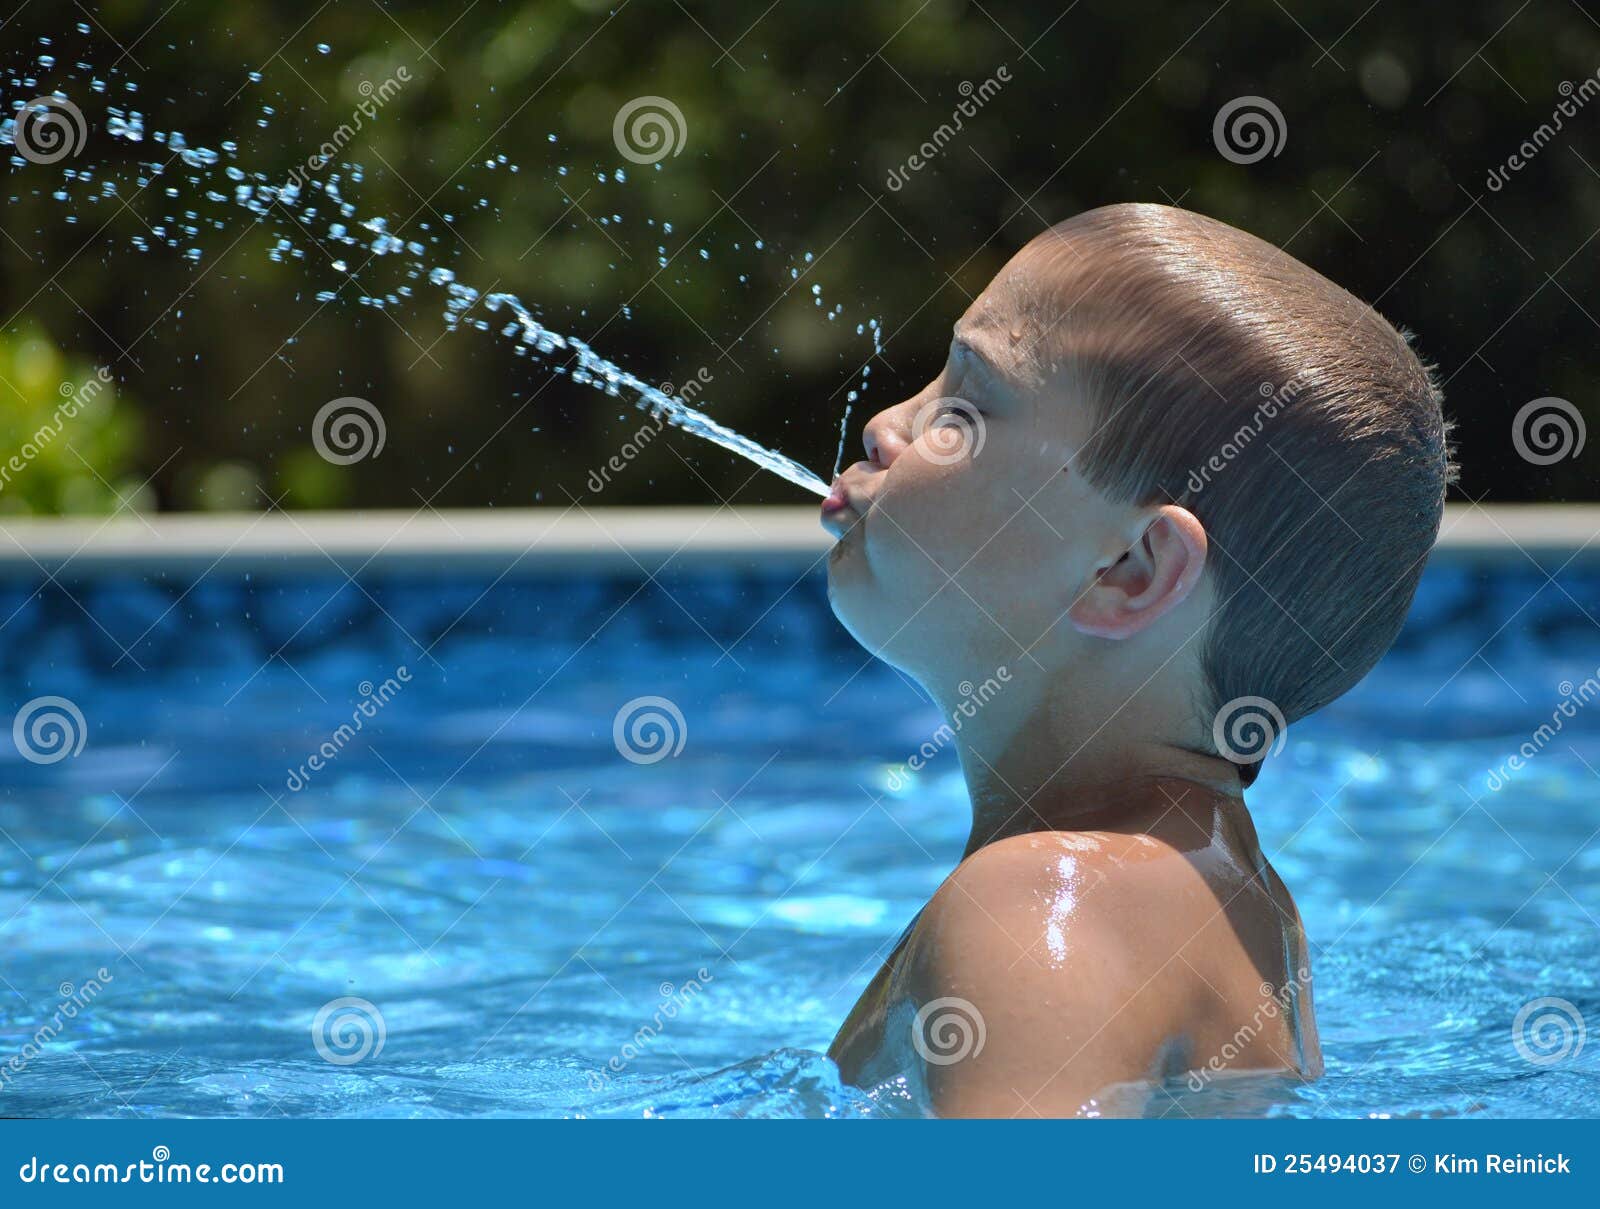 spitting out water